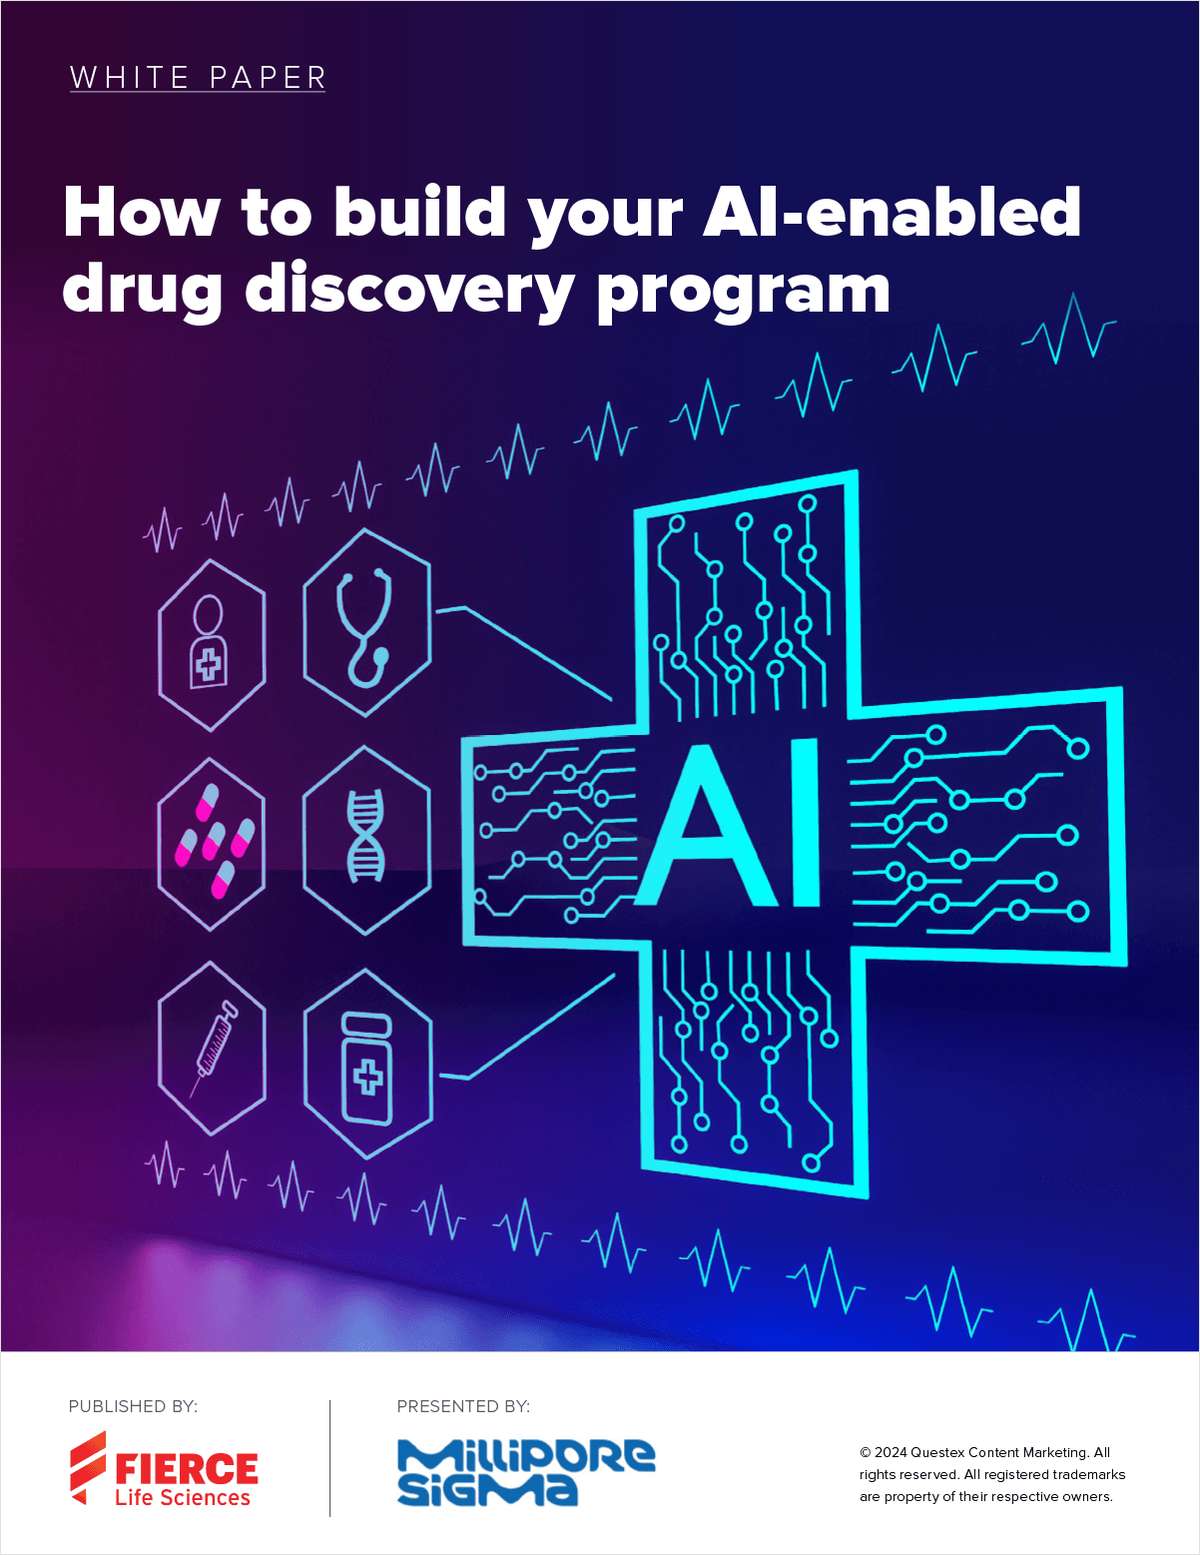 How to build your AI-enabled drug discovery program